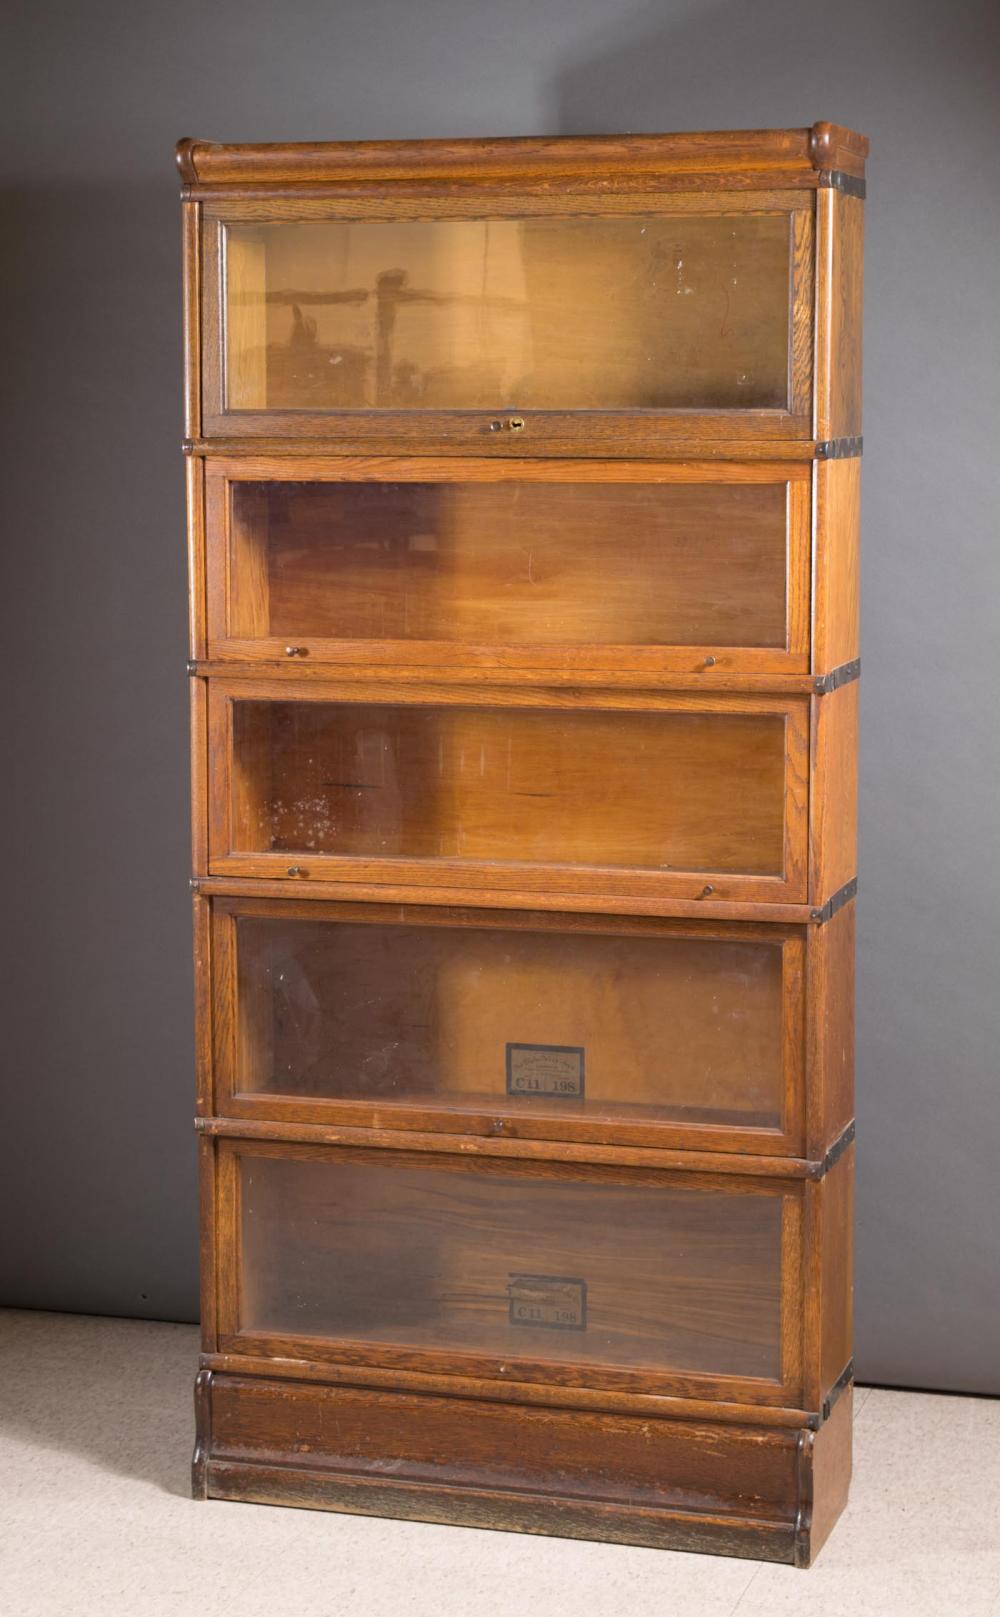 FIVE-SECTION STACKING OAK BOOKCASEFIVE-SECTION